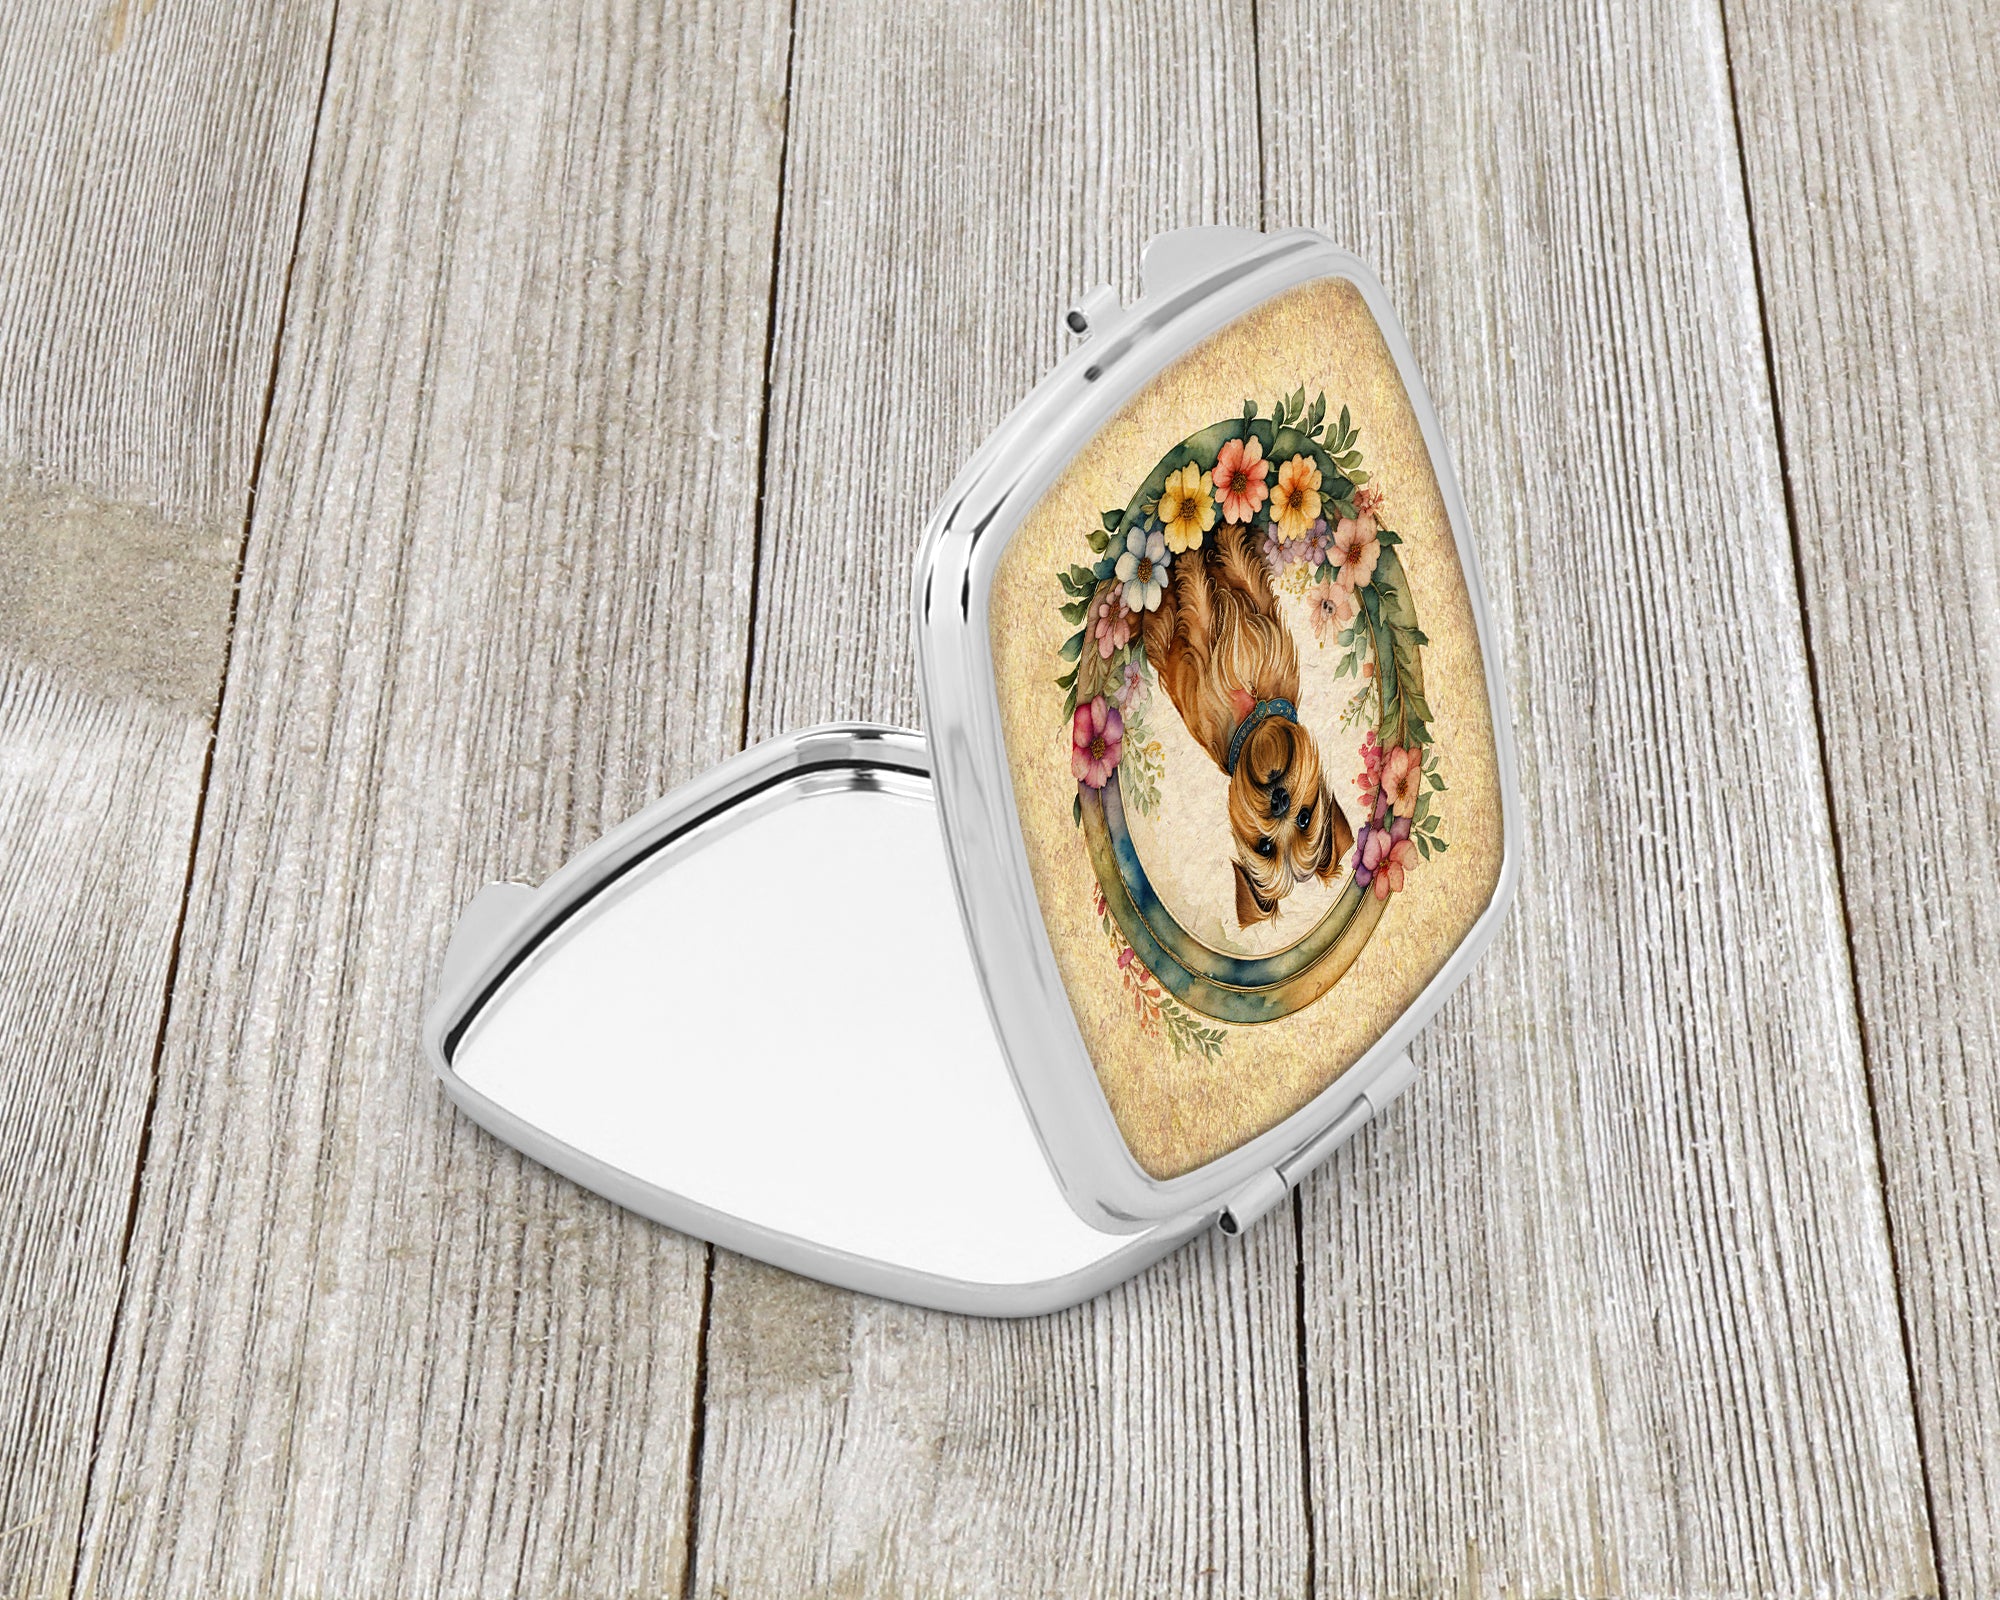 Buy this Norfolk Terrier and Flowers Compact Mirror